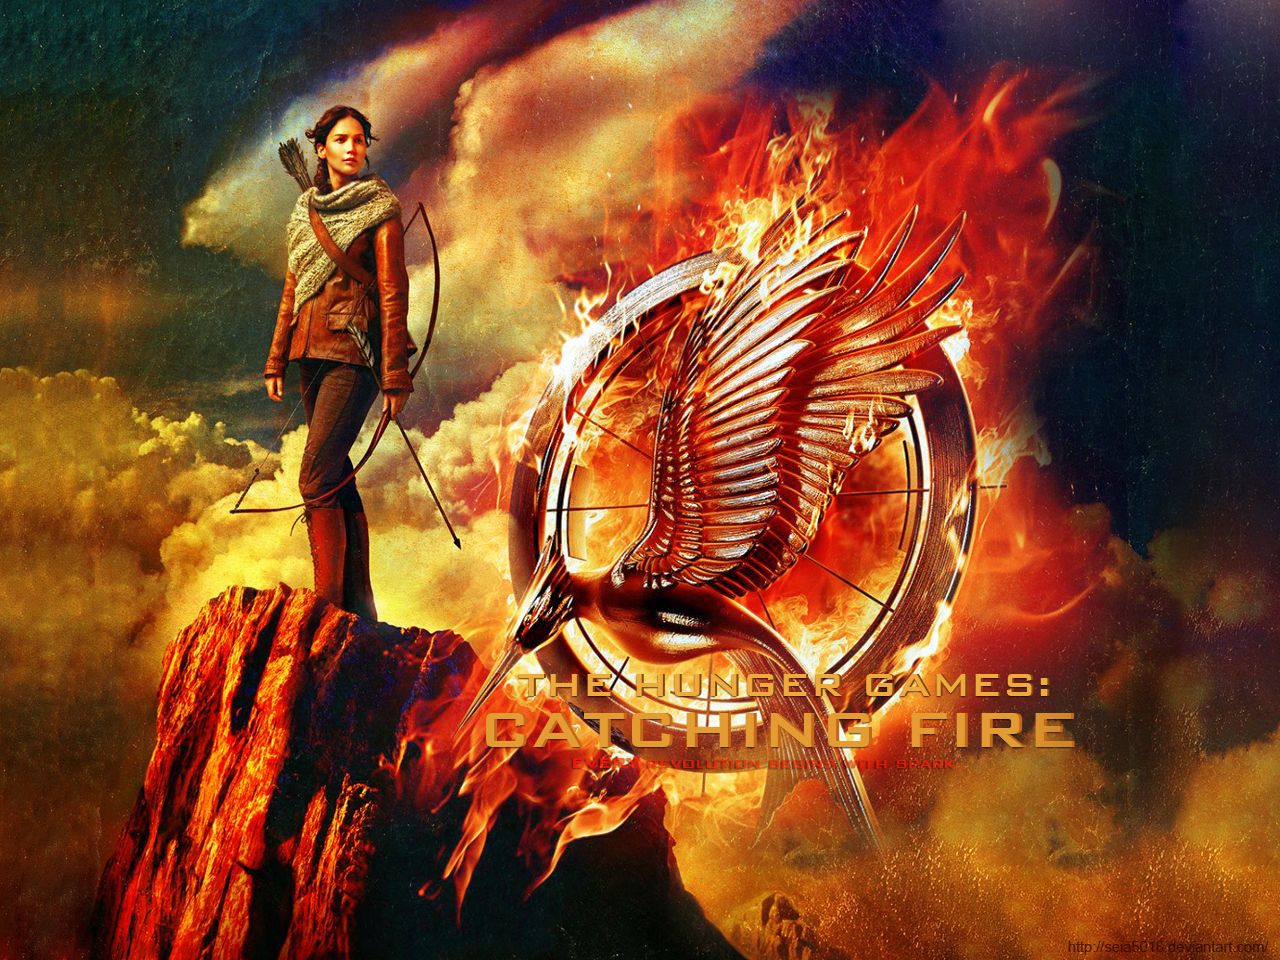 The Hunger Games Catching Fire by vgwallpapers on DeviantArt